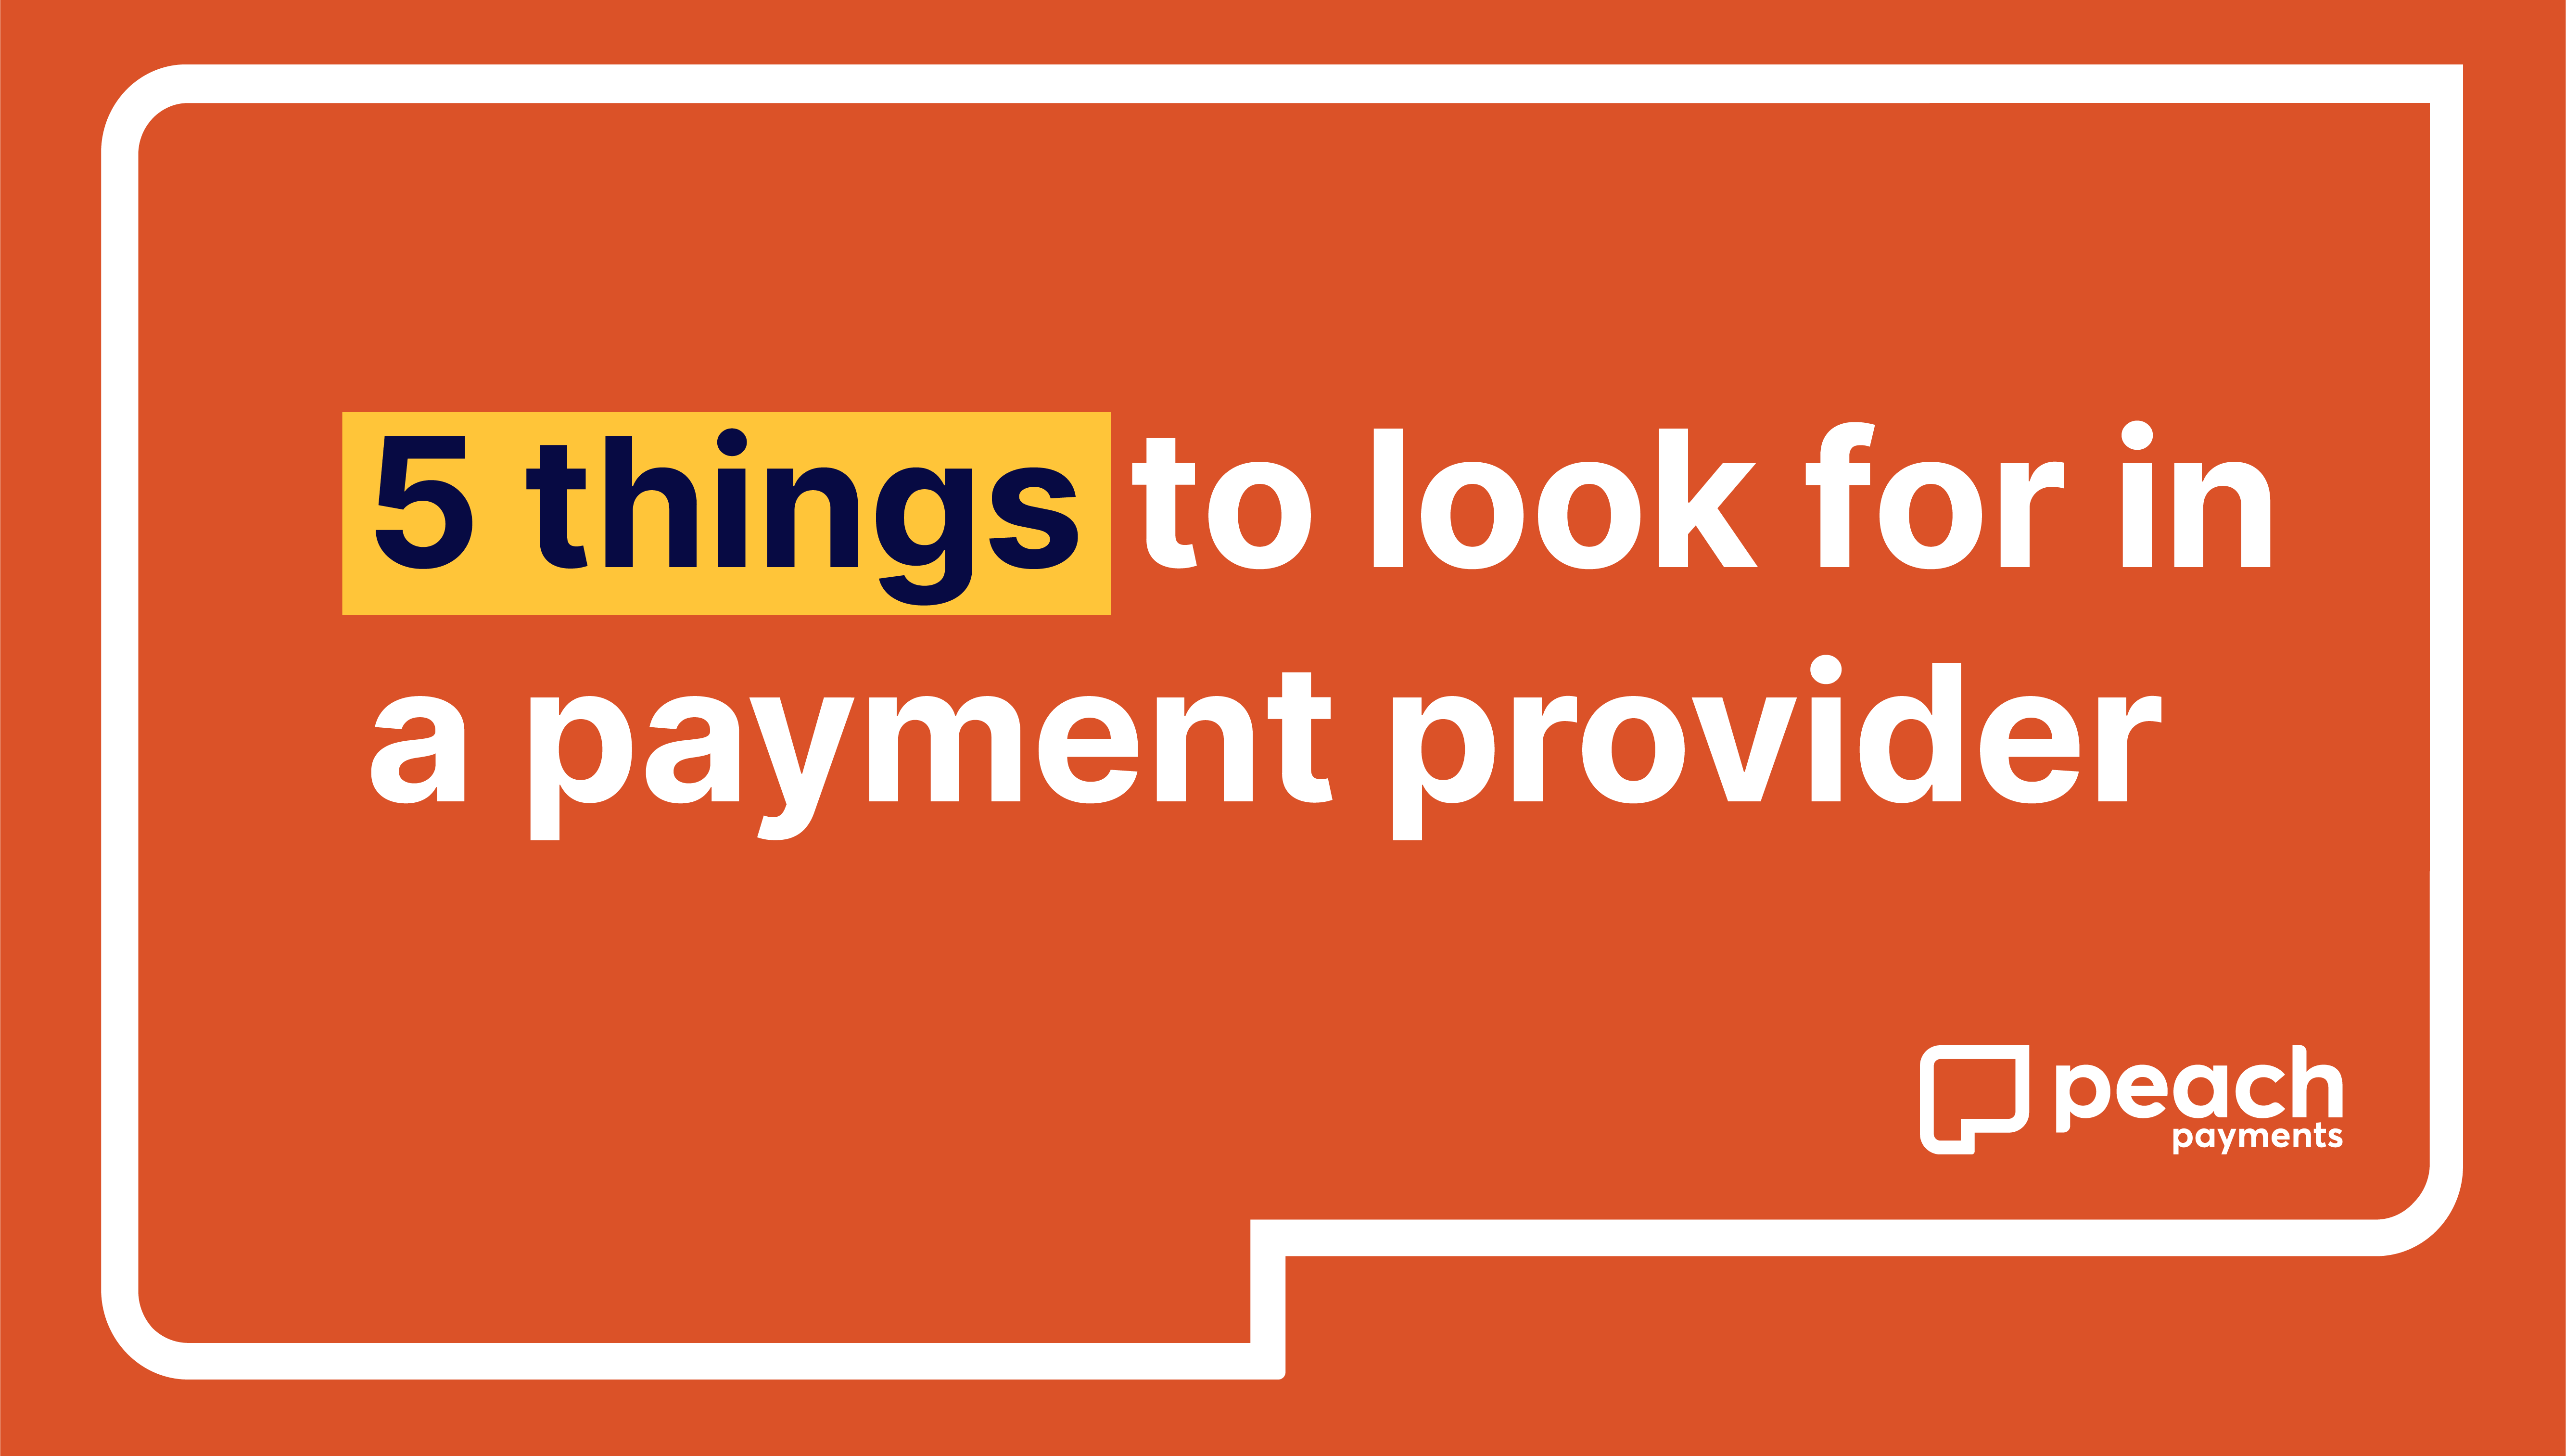 5 things to look for in a payments provider